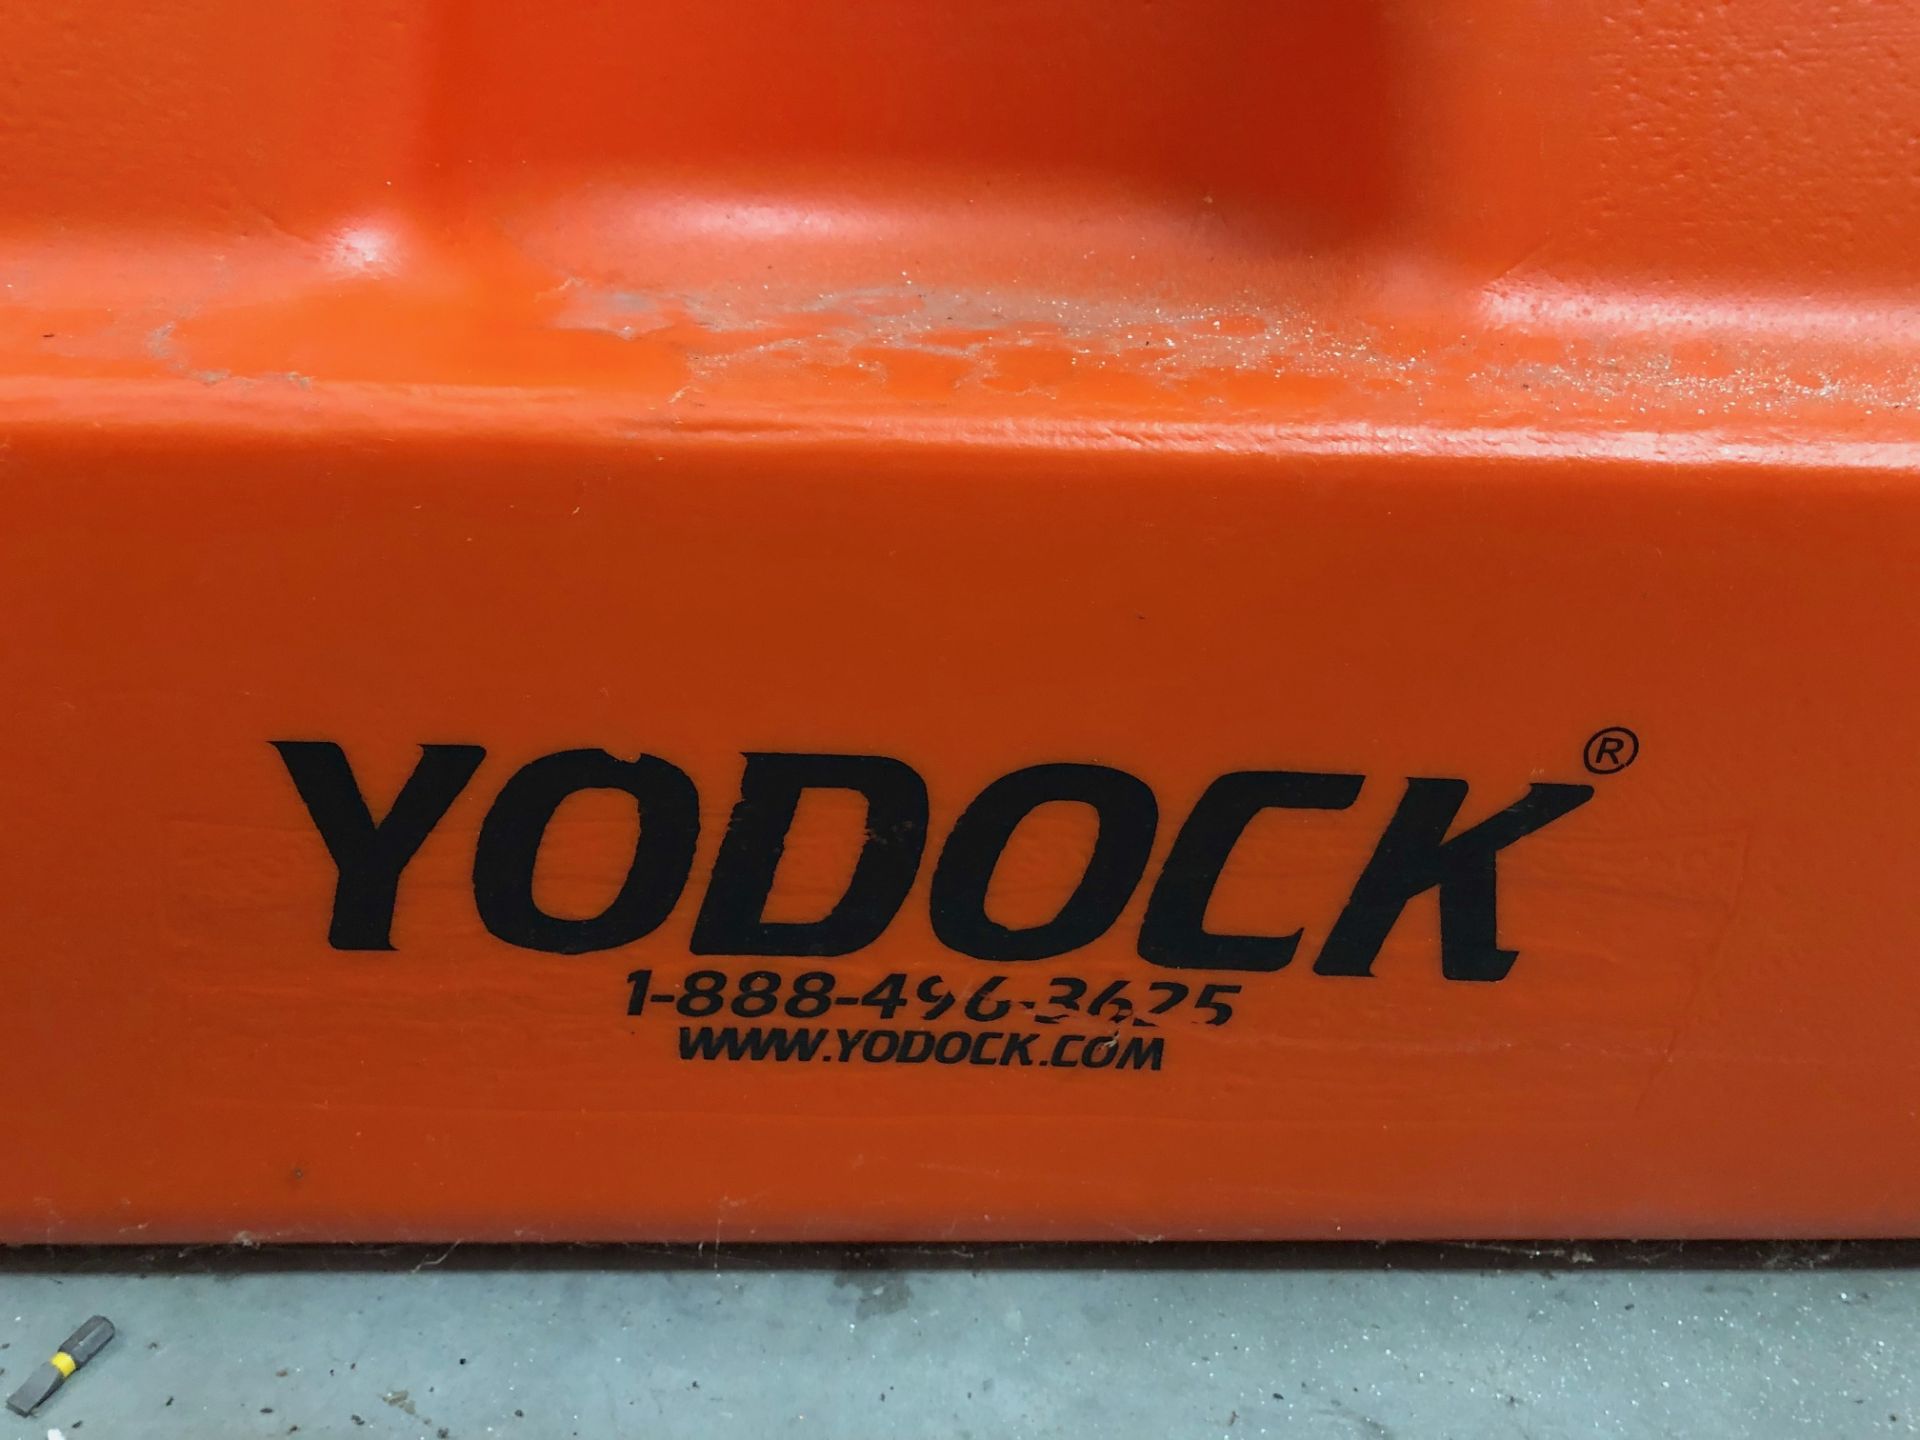 (3) Yodock Portable Orange Construction Barriers - Image 2 of 7